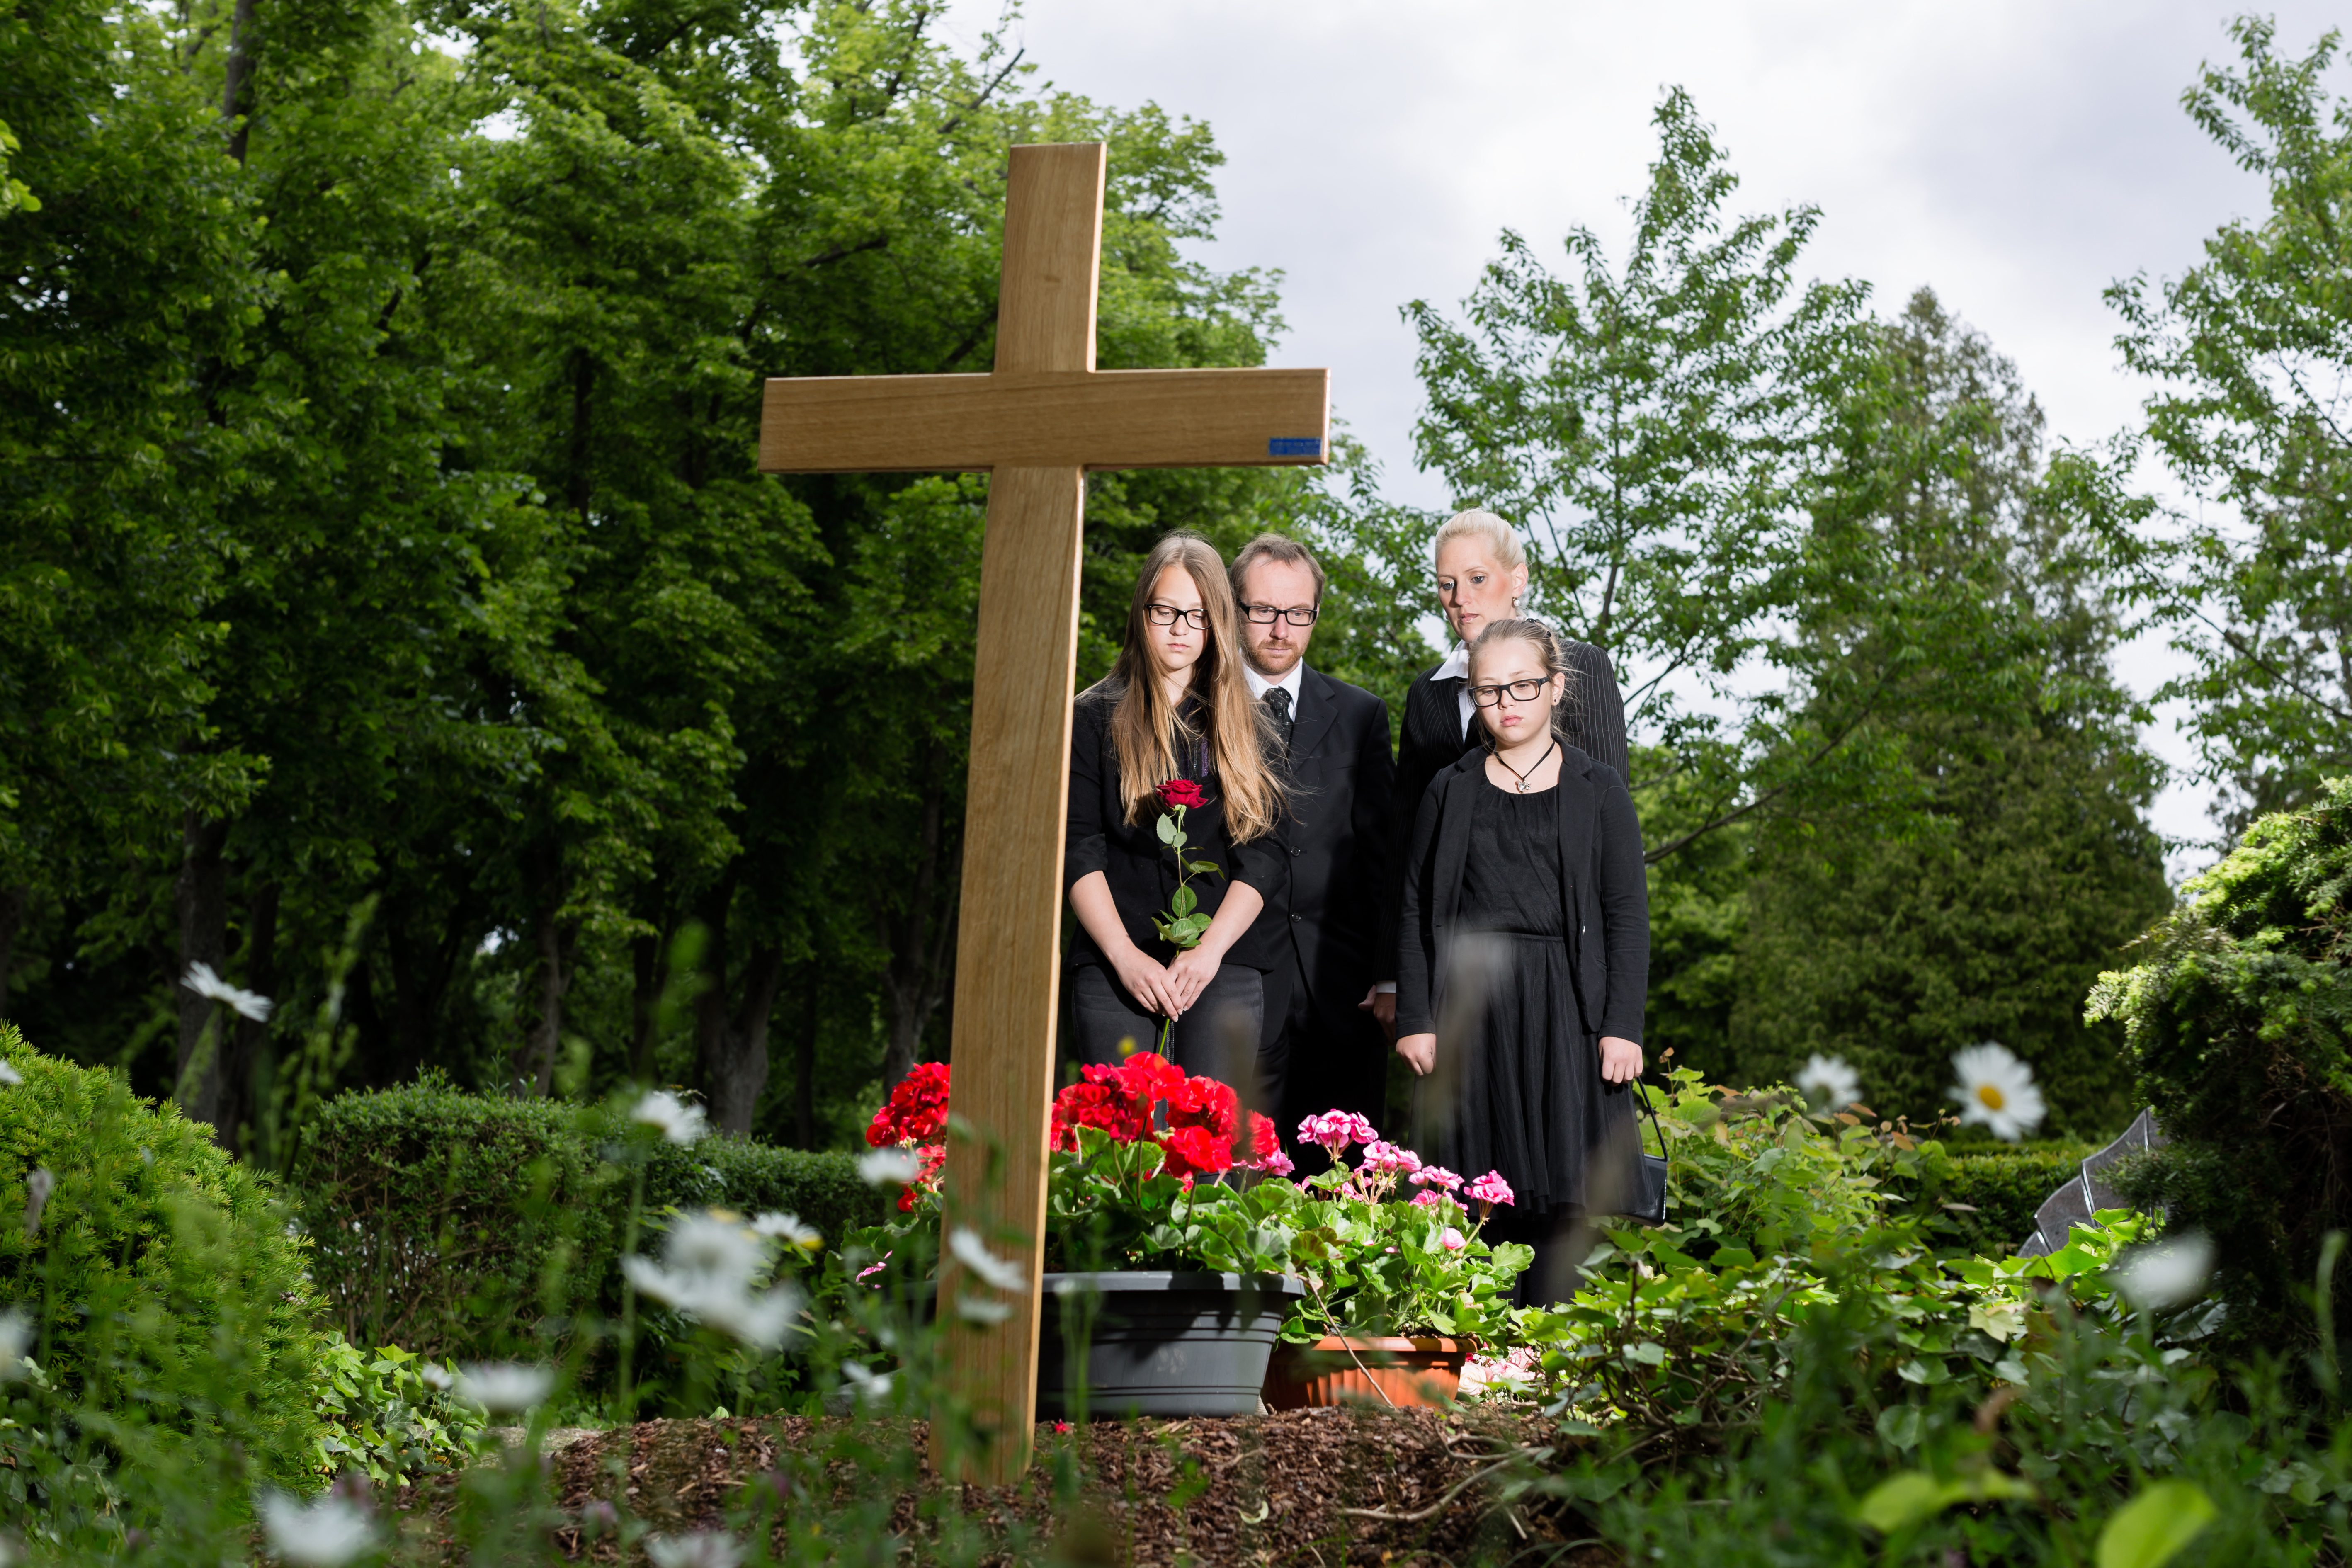 A family at a funeral | Source: Shutterstock